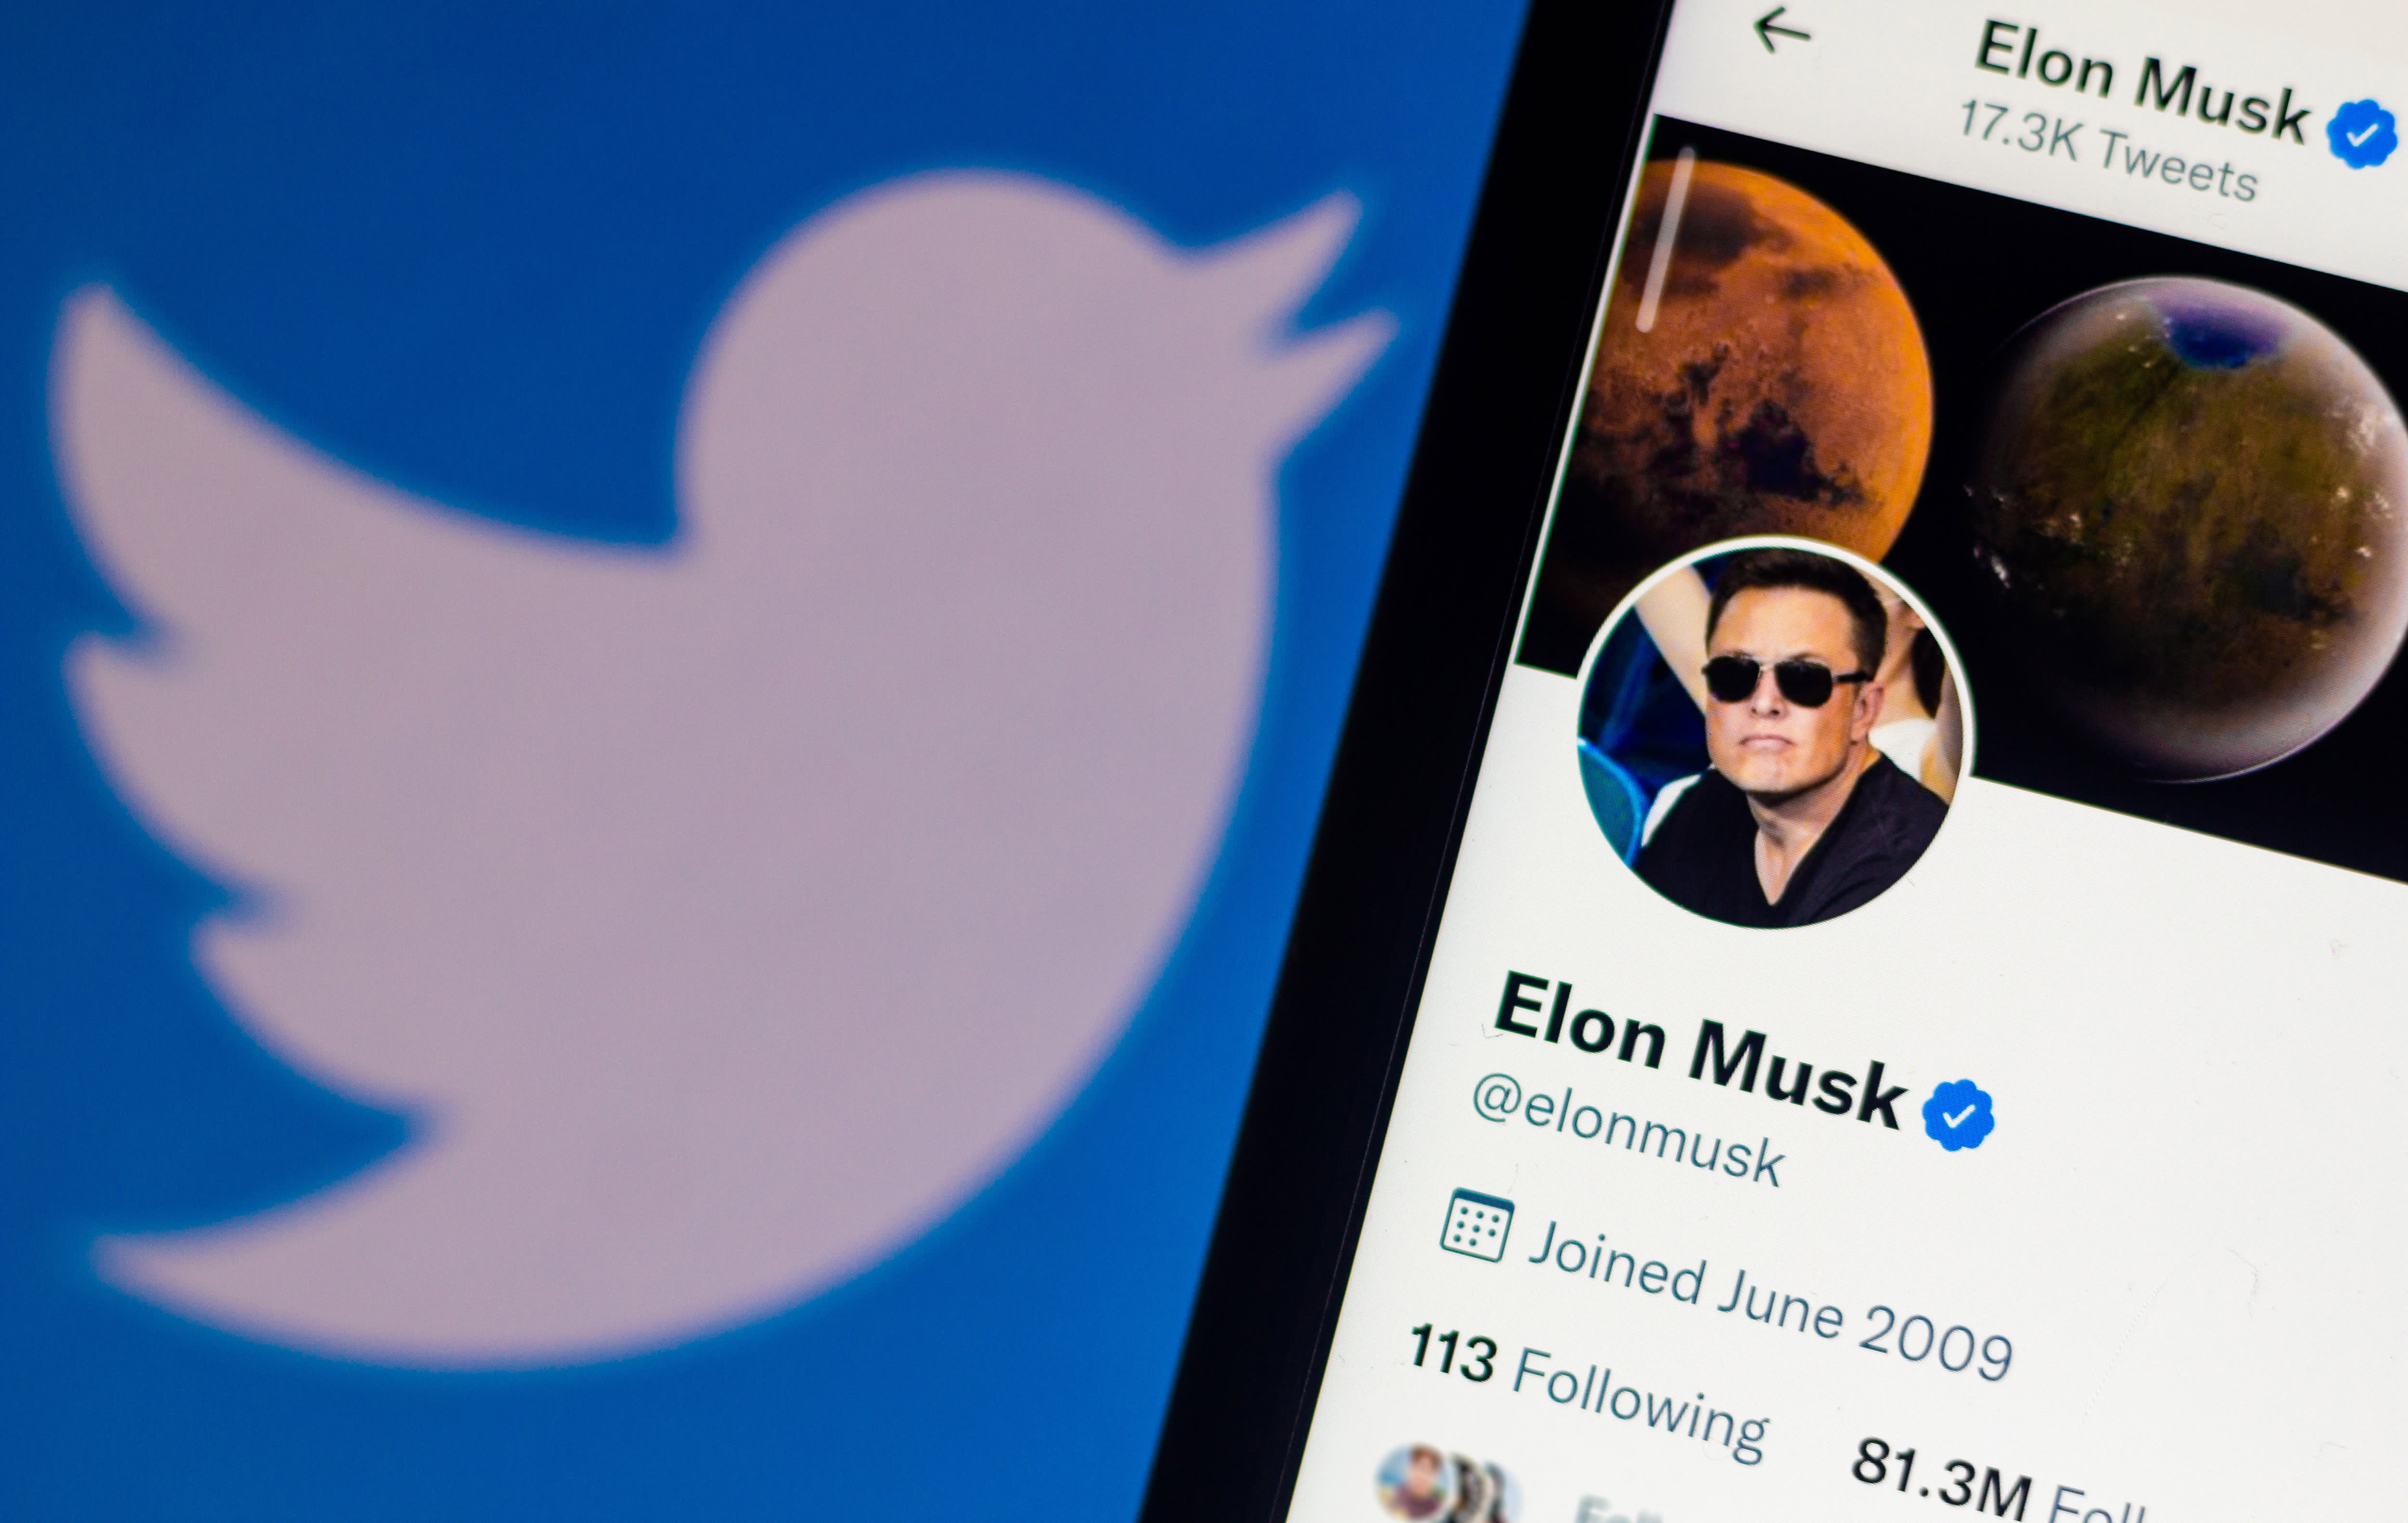 Twitter resumes trading as company announces it approved Musk's bid